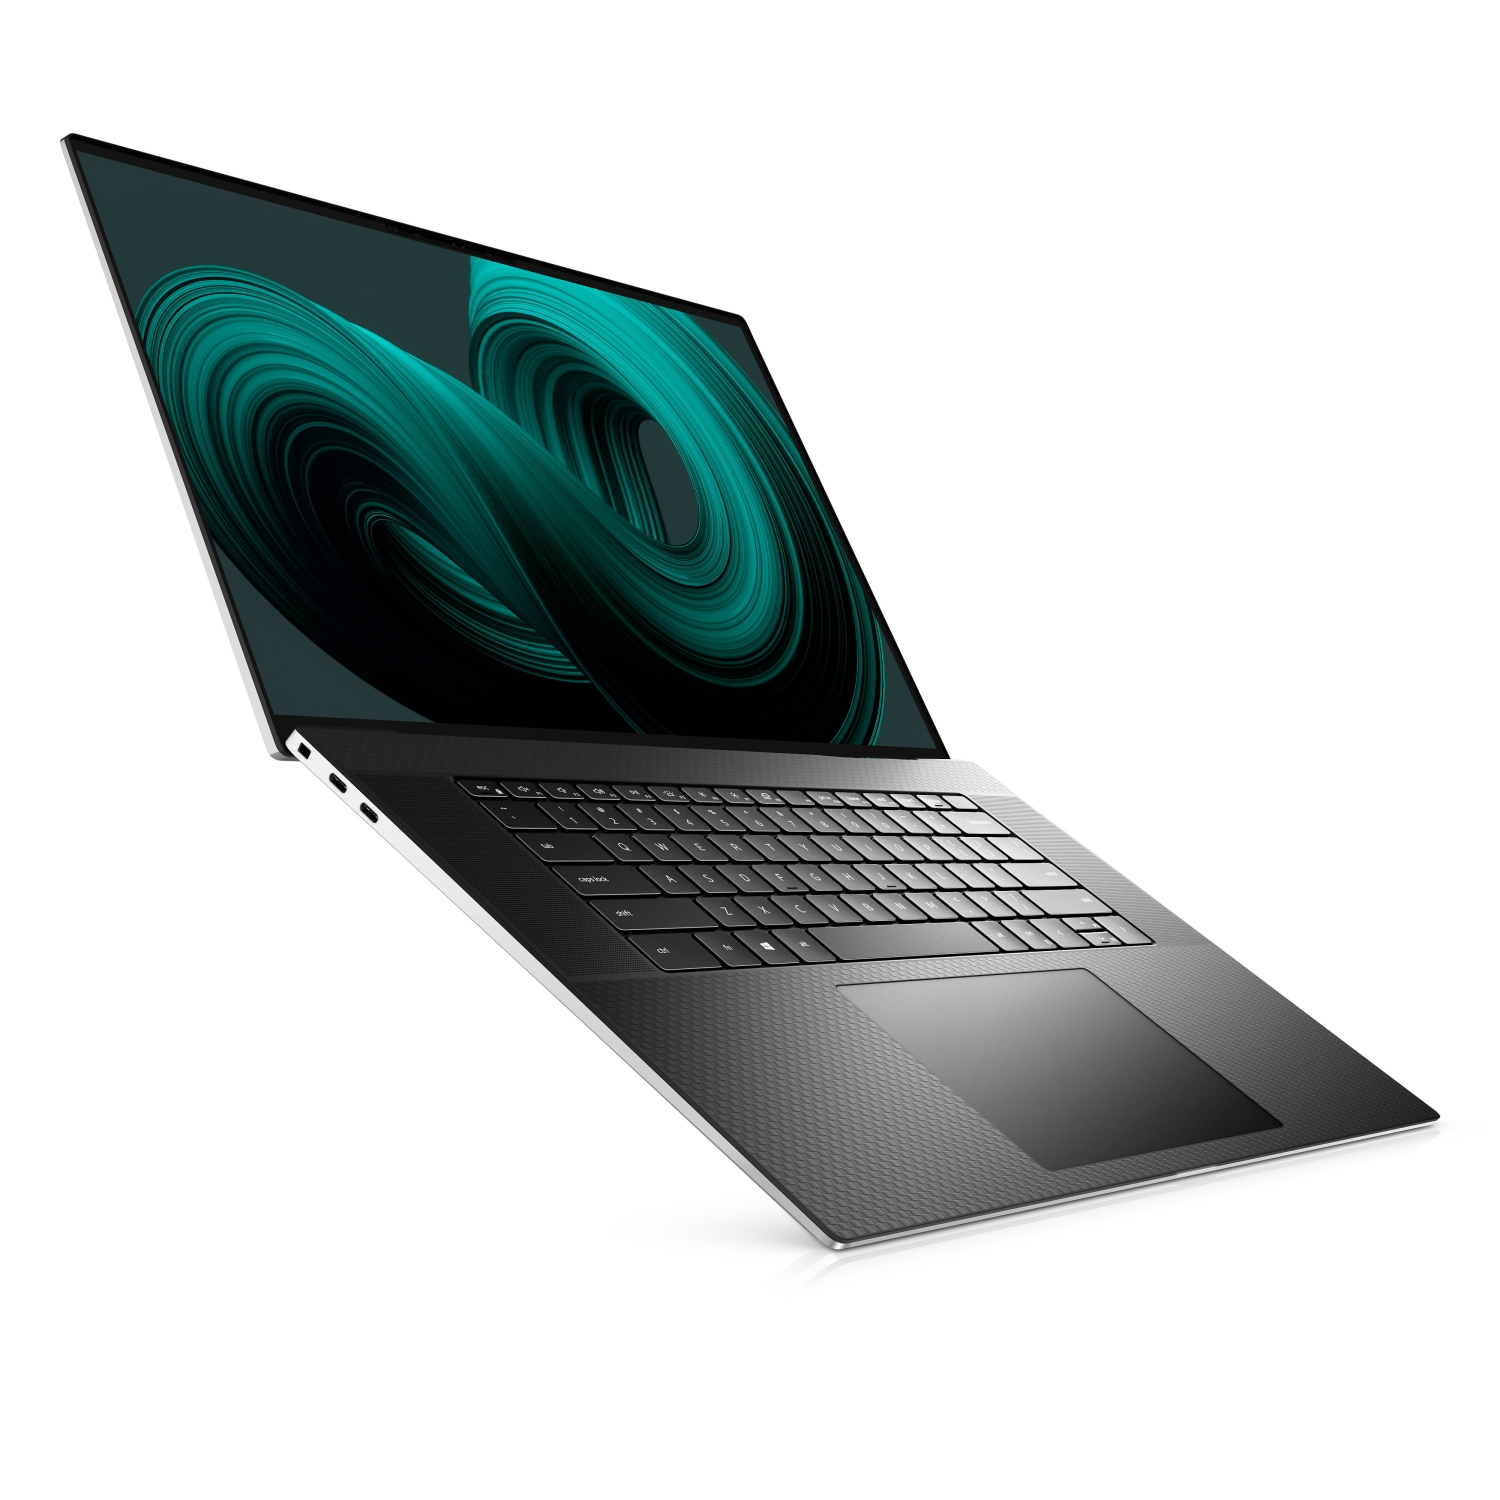 Refurbished (Excellent) - Dell XPS 17 9710 Laptop (2021) | 17" FHD+ | Core i9 - 512GB SSD - 32GB RAM - RTX 3060 | 8 Cores @ 5 GHz - 11th Gen CPU Certified Refurbished